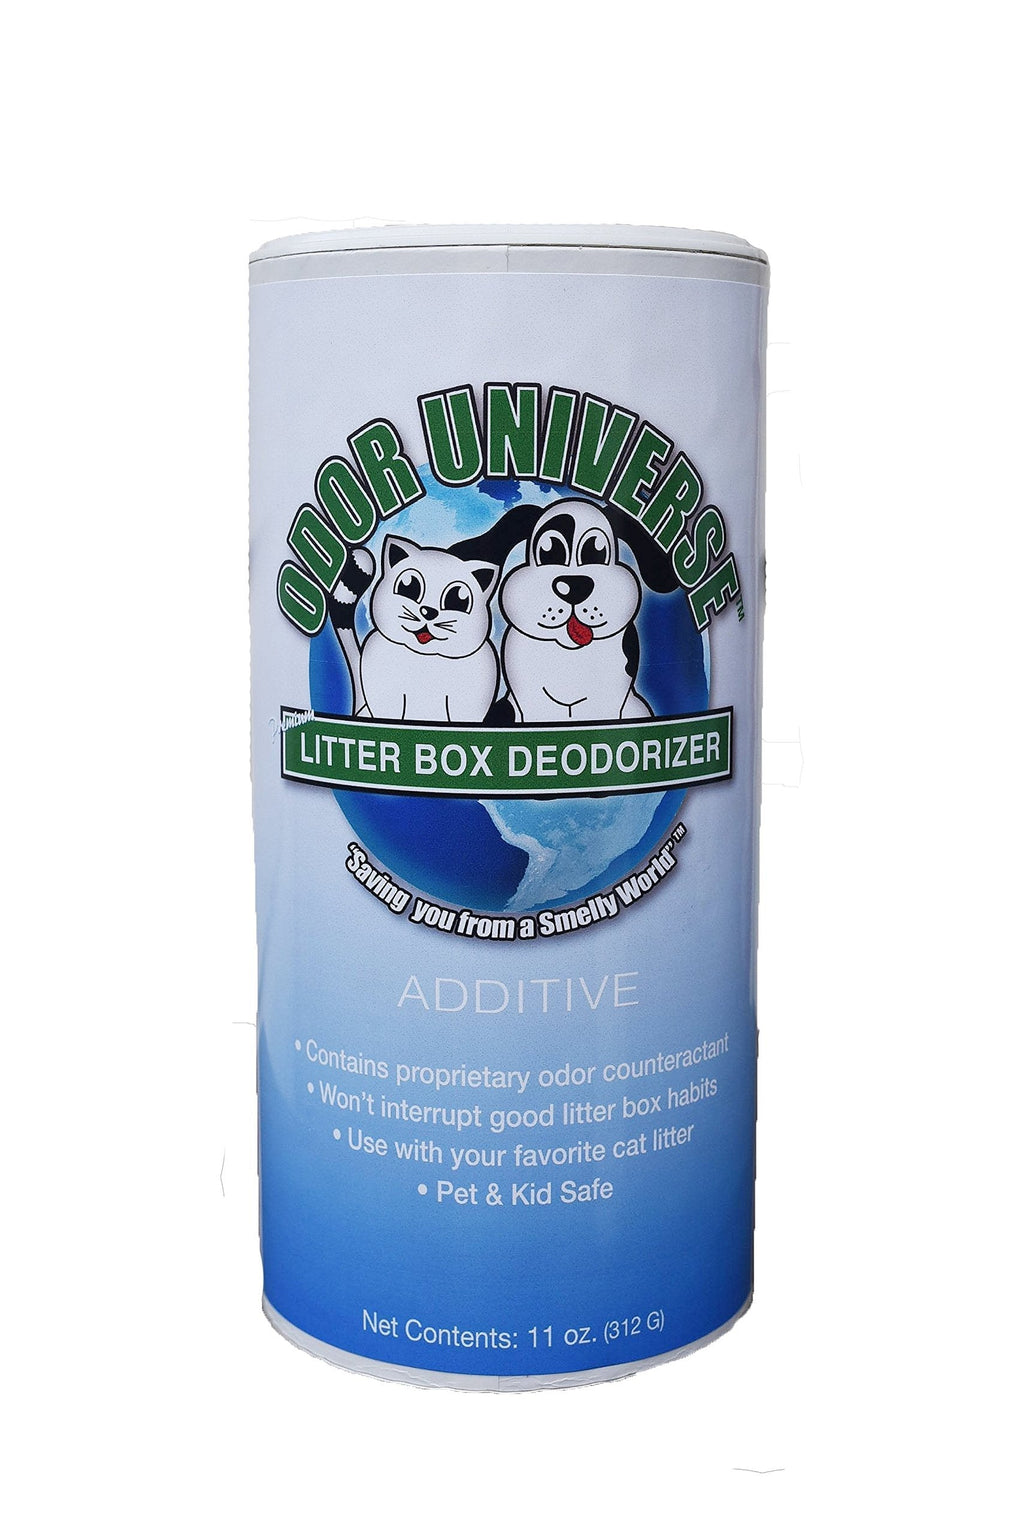 [Australia] - Odor Universe Litter Box Deodorizer Professional Strength Kitty Litter Odor Control and Odor Destroying Powder Non-Toxic and Biodegradable Order Eliminating Granules 11 oz. 